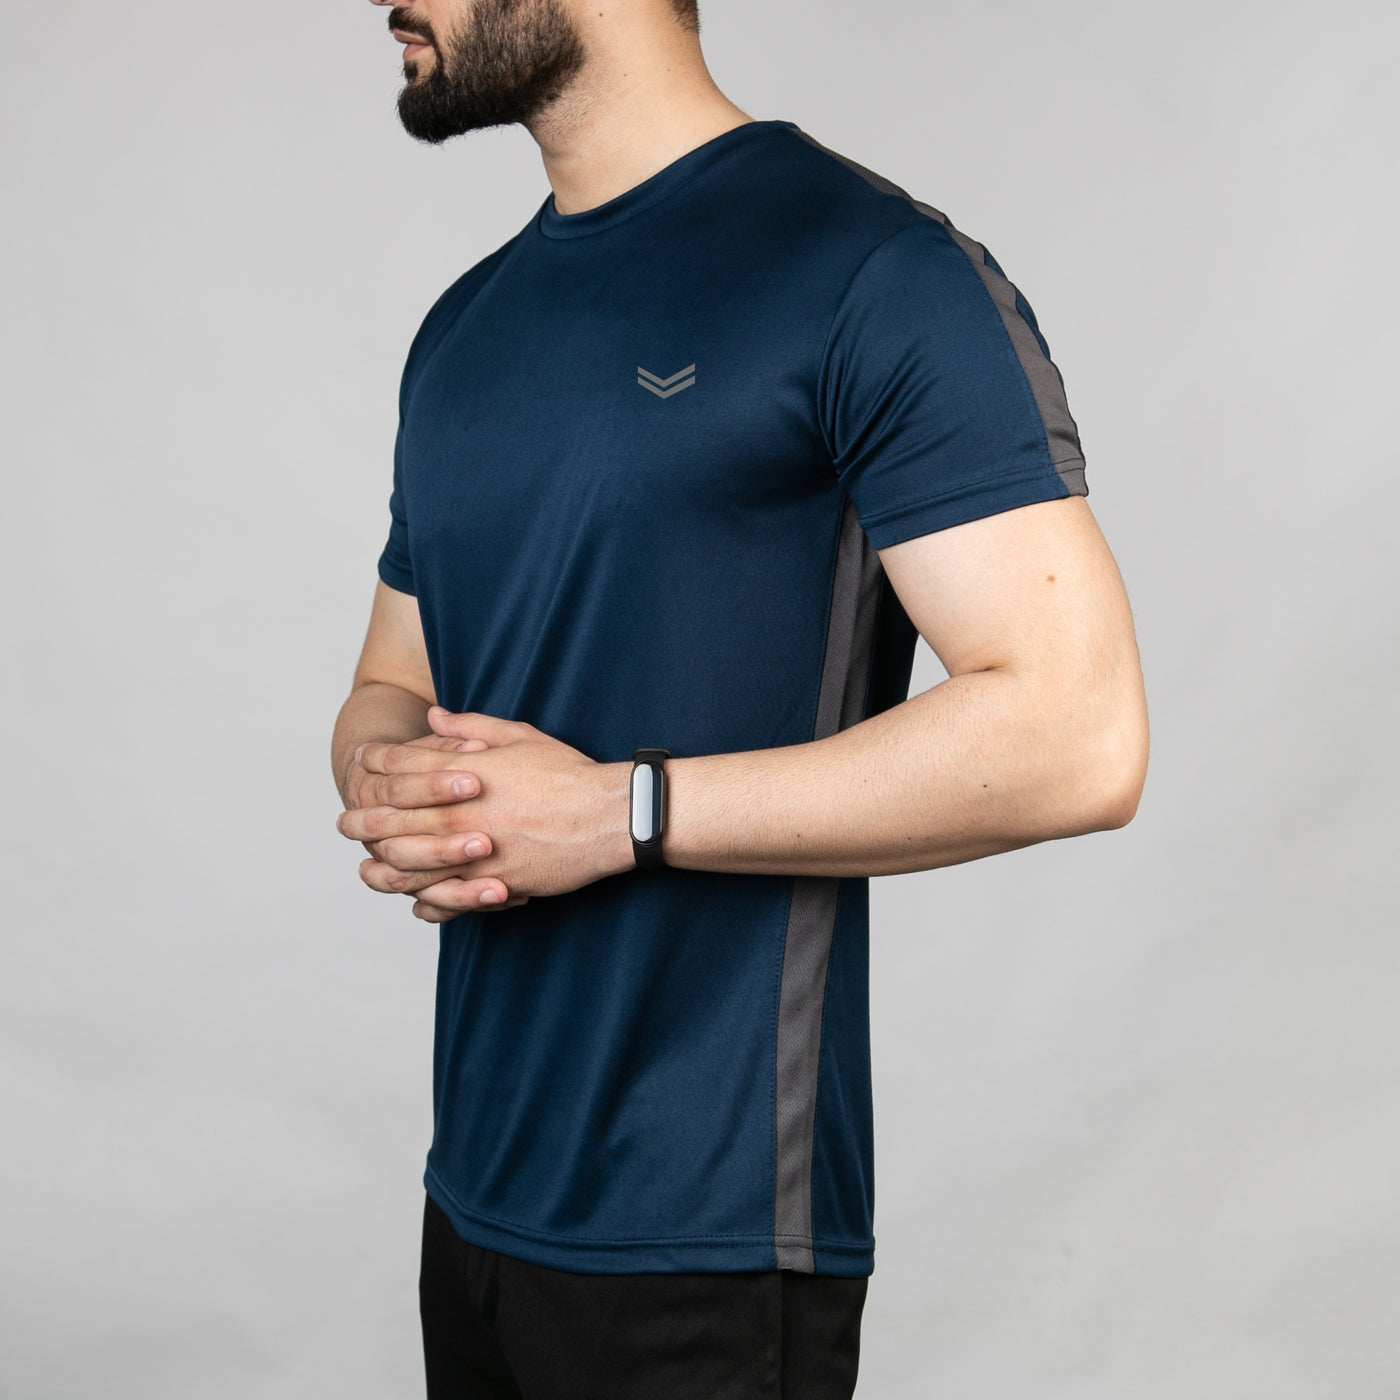 Sapphire Hybrid Series Quick Dry T-Shirt with Gray Mesh Panels